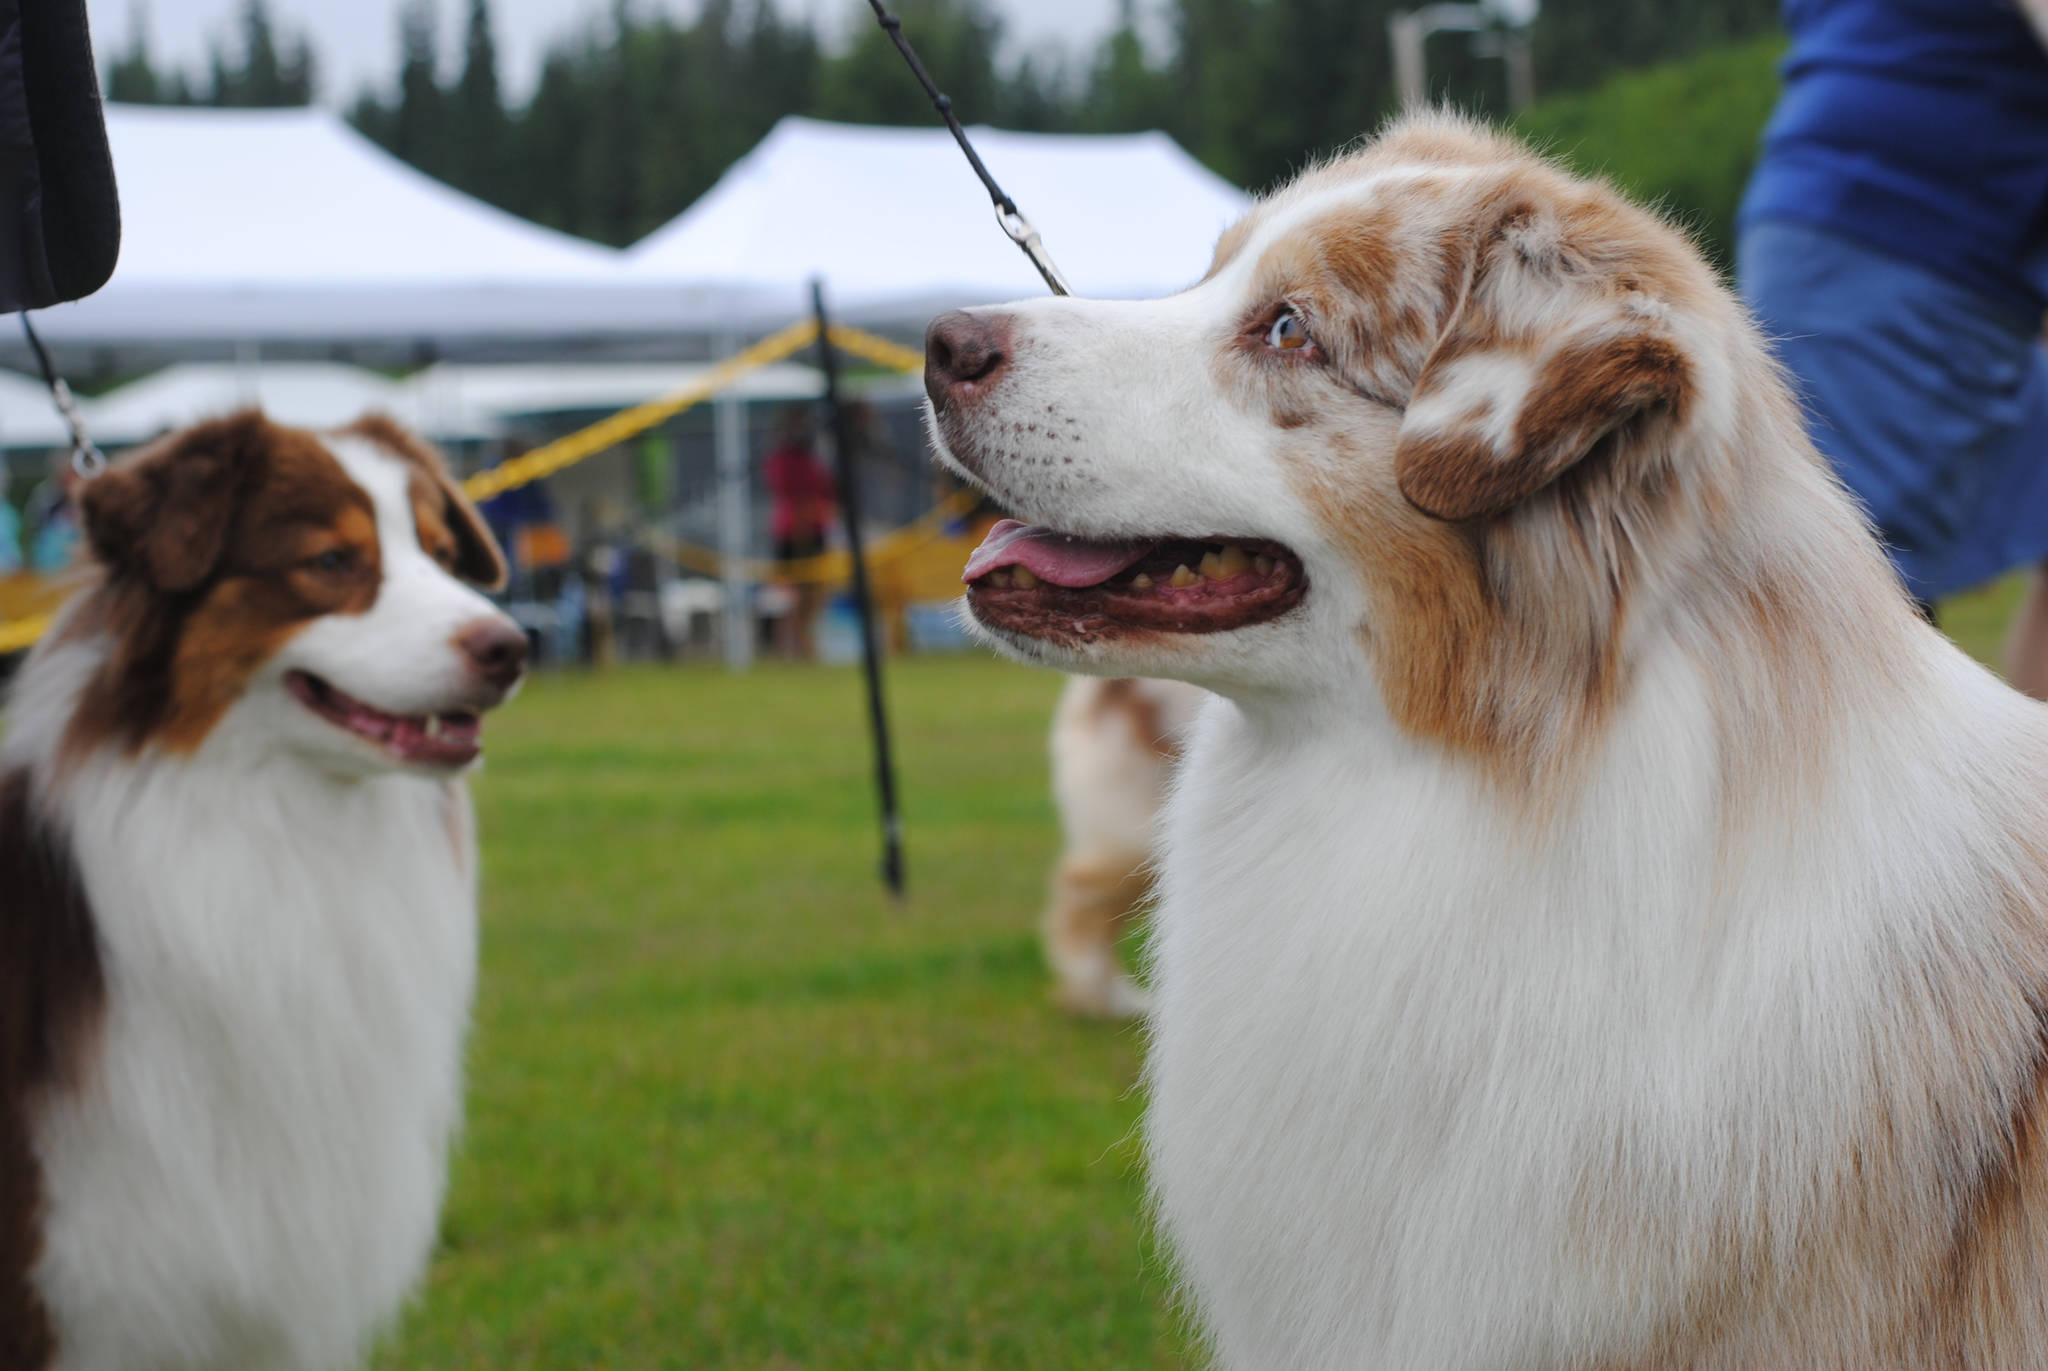 Mick the Australian Shepherd competes in te breed competition during the Kenai Kennel Club’s dog show Saturday, July 15, 2017 at Skyview Middle School in Soldotna, Alaska. Mick is a three-time Best in Show winner at the dog show, but lost to his son during Friday’s competition. (Photo by Kat Sorensen/Peninsula Clarion)